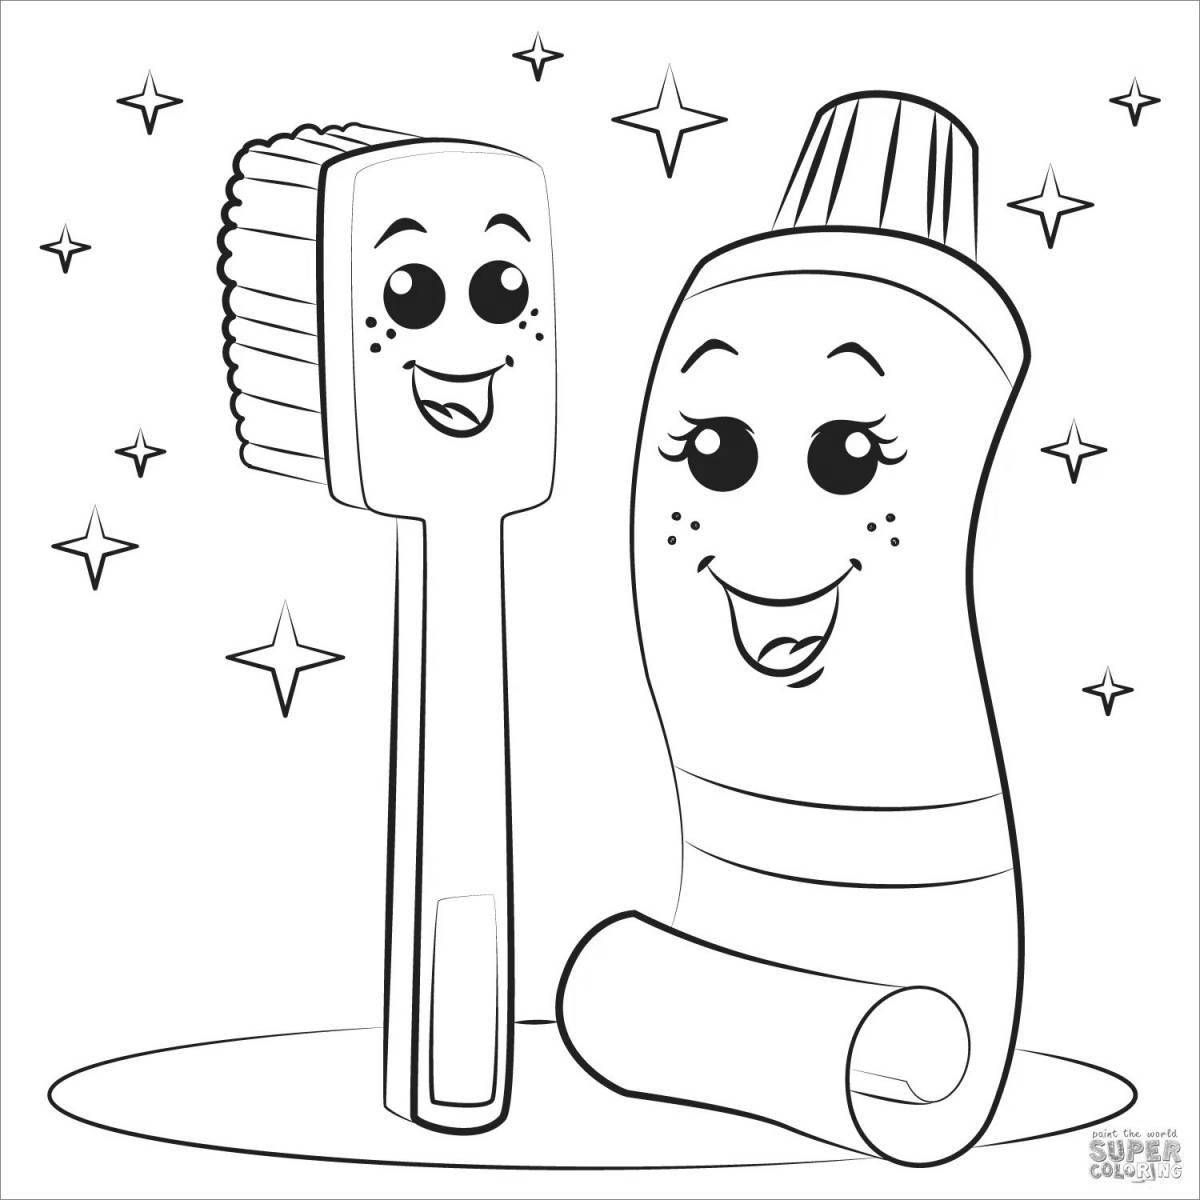 Twinkling coloring page toothpaste for children